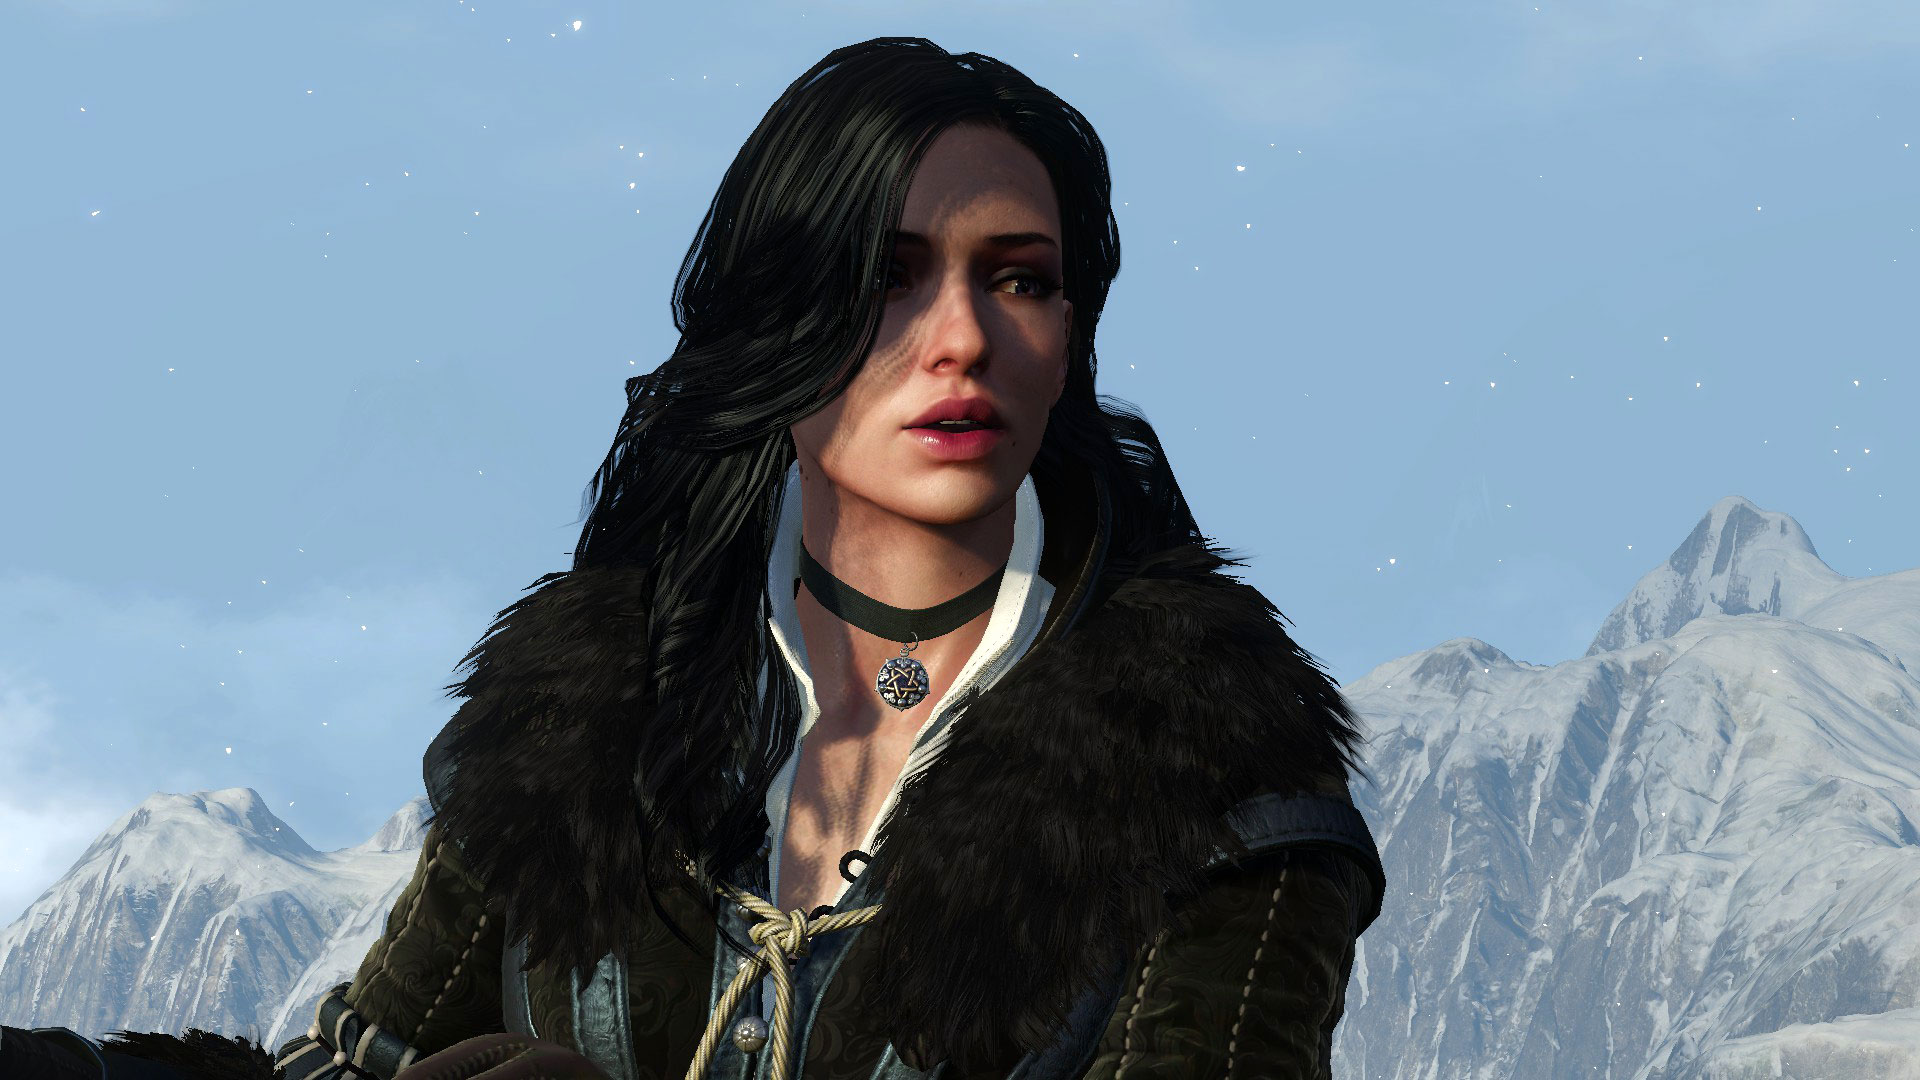 Yennefer In The Snow